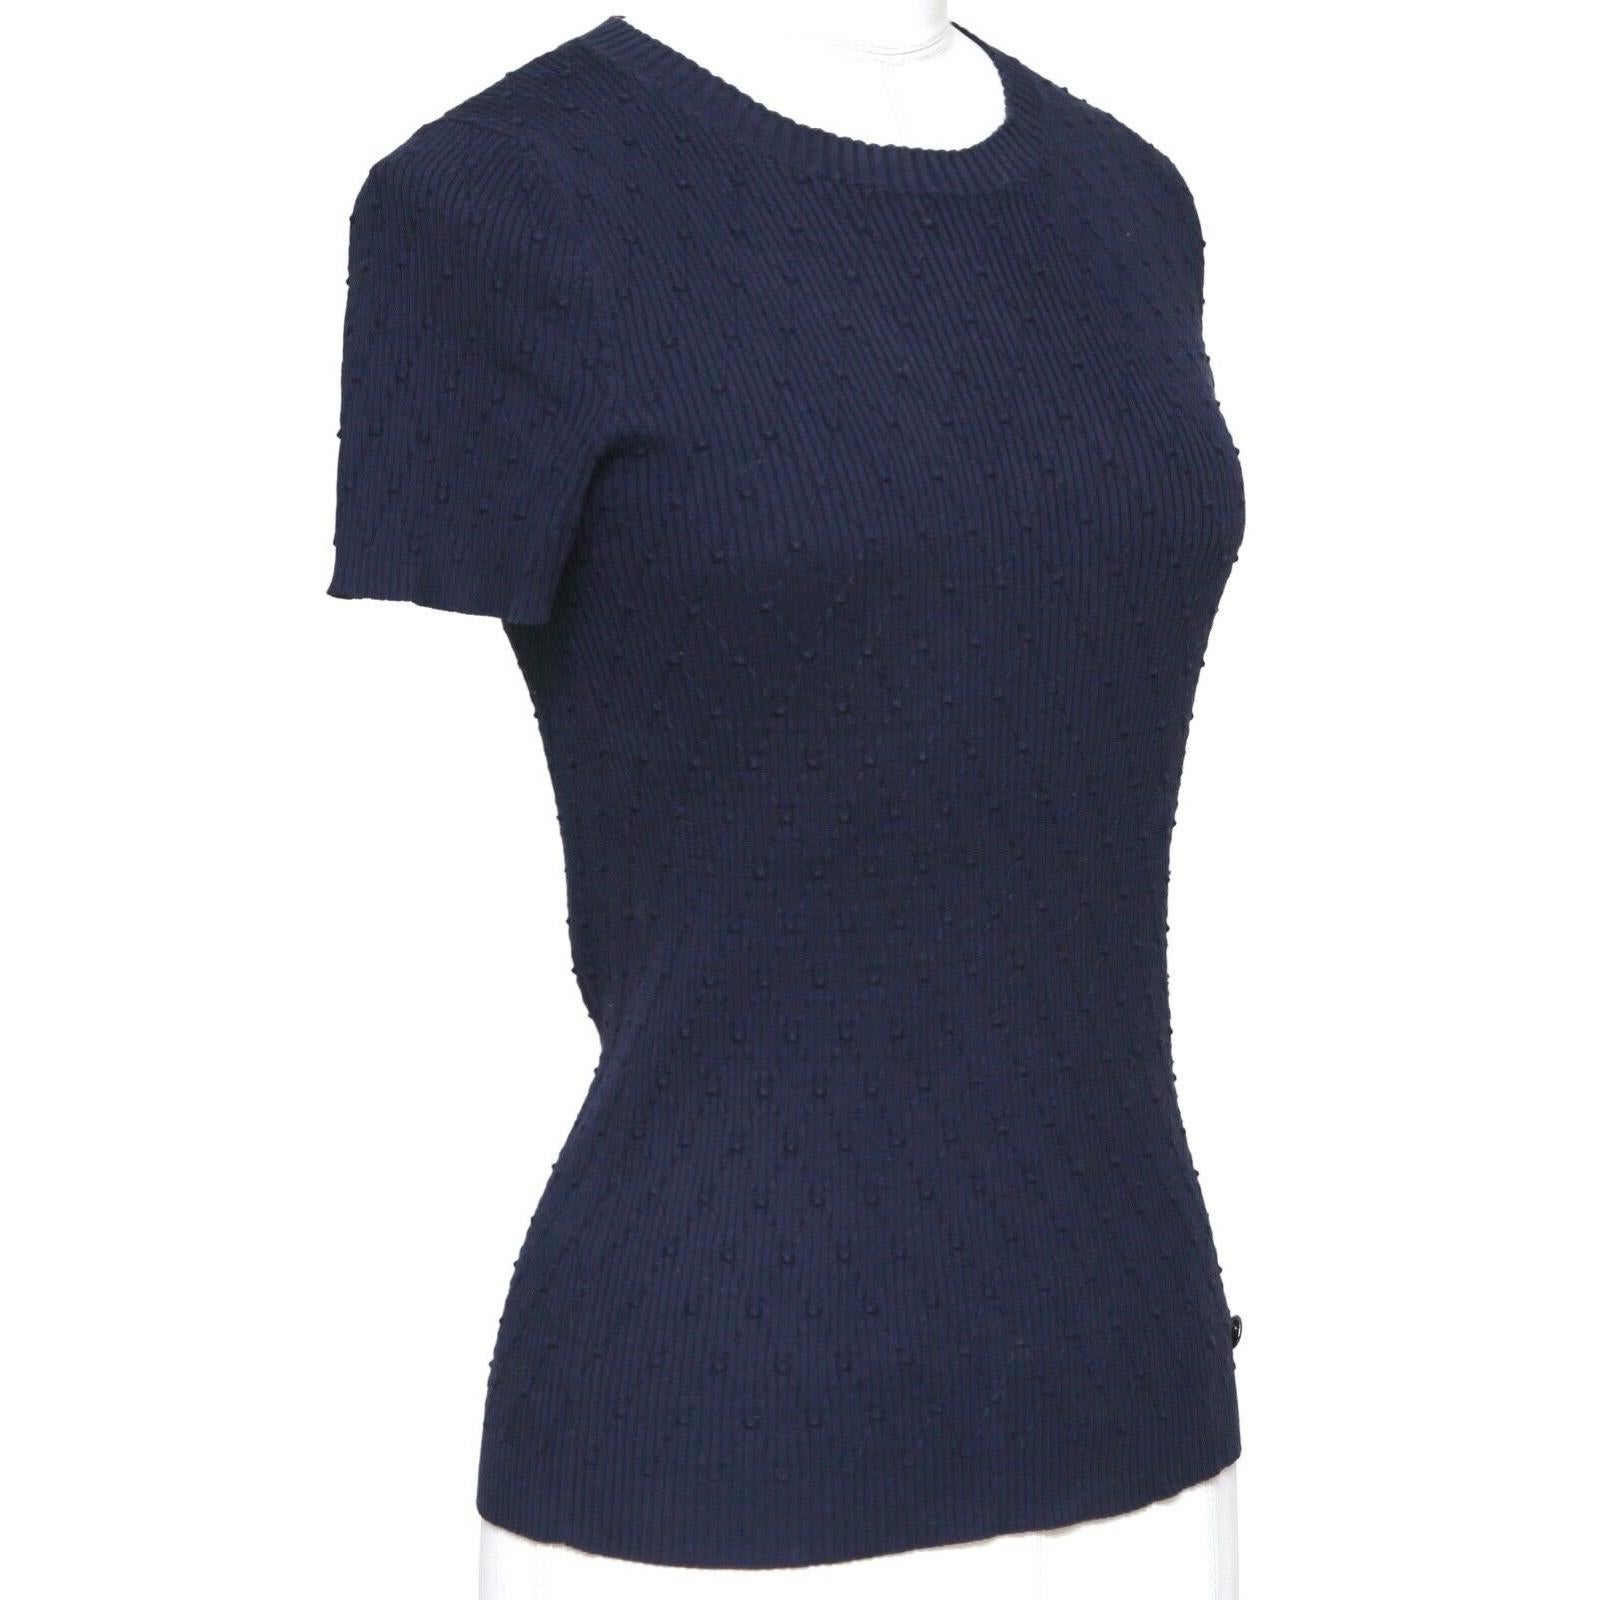 GUARANTEED AUTHENTIC CHANEL NAVY BLUE SHORT SLEEVE DIAMOND QUILTED PATTERN TOP

Design:
- Versatile short sleeve diamond quilted pattern knit top in a rich navy blue color.
- Crew neck.
- Slip on.
- CC logo at left hip.

Size: 34

Measurements